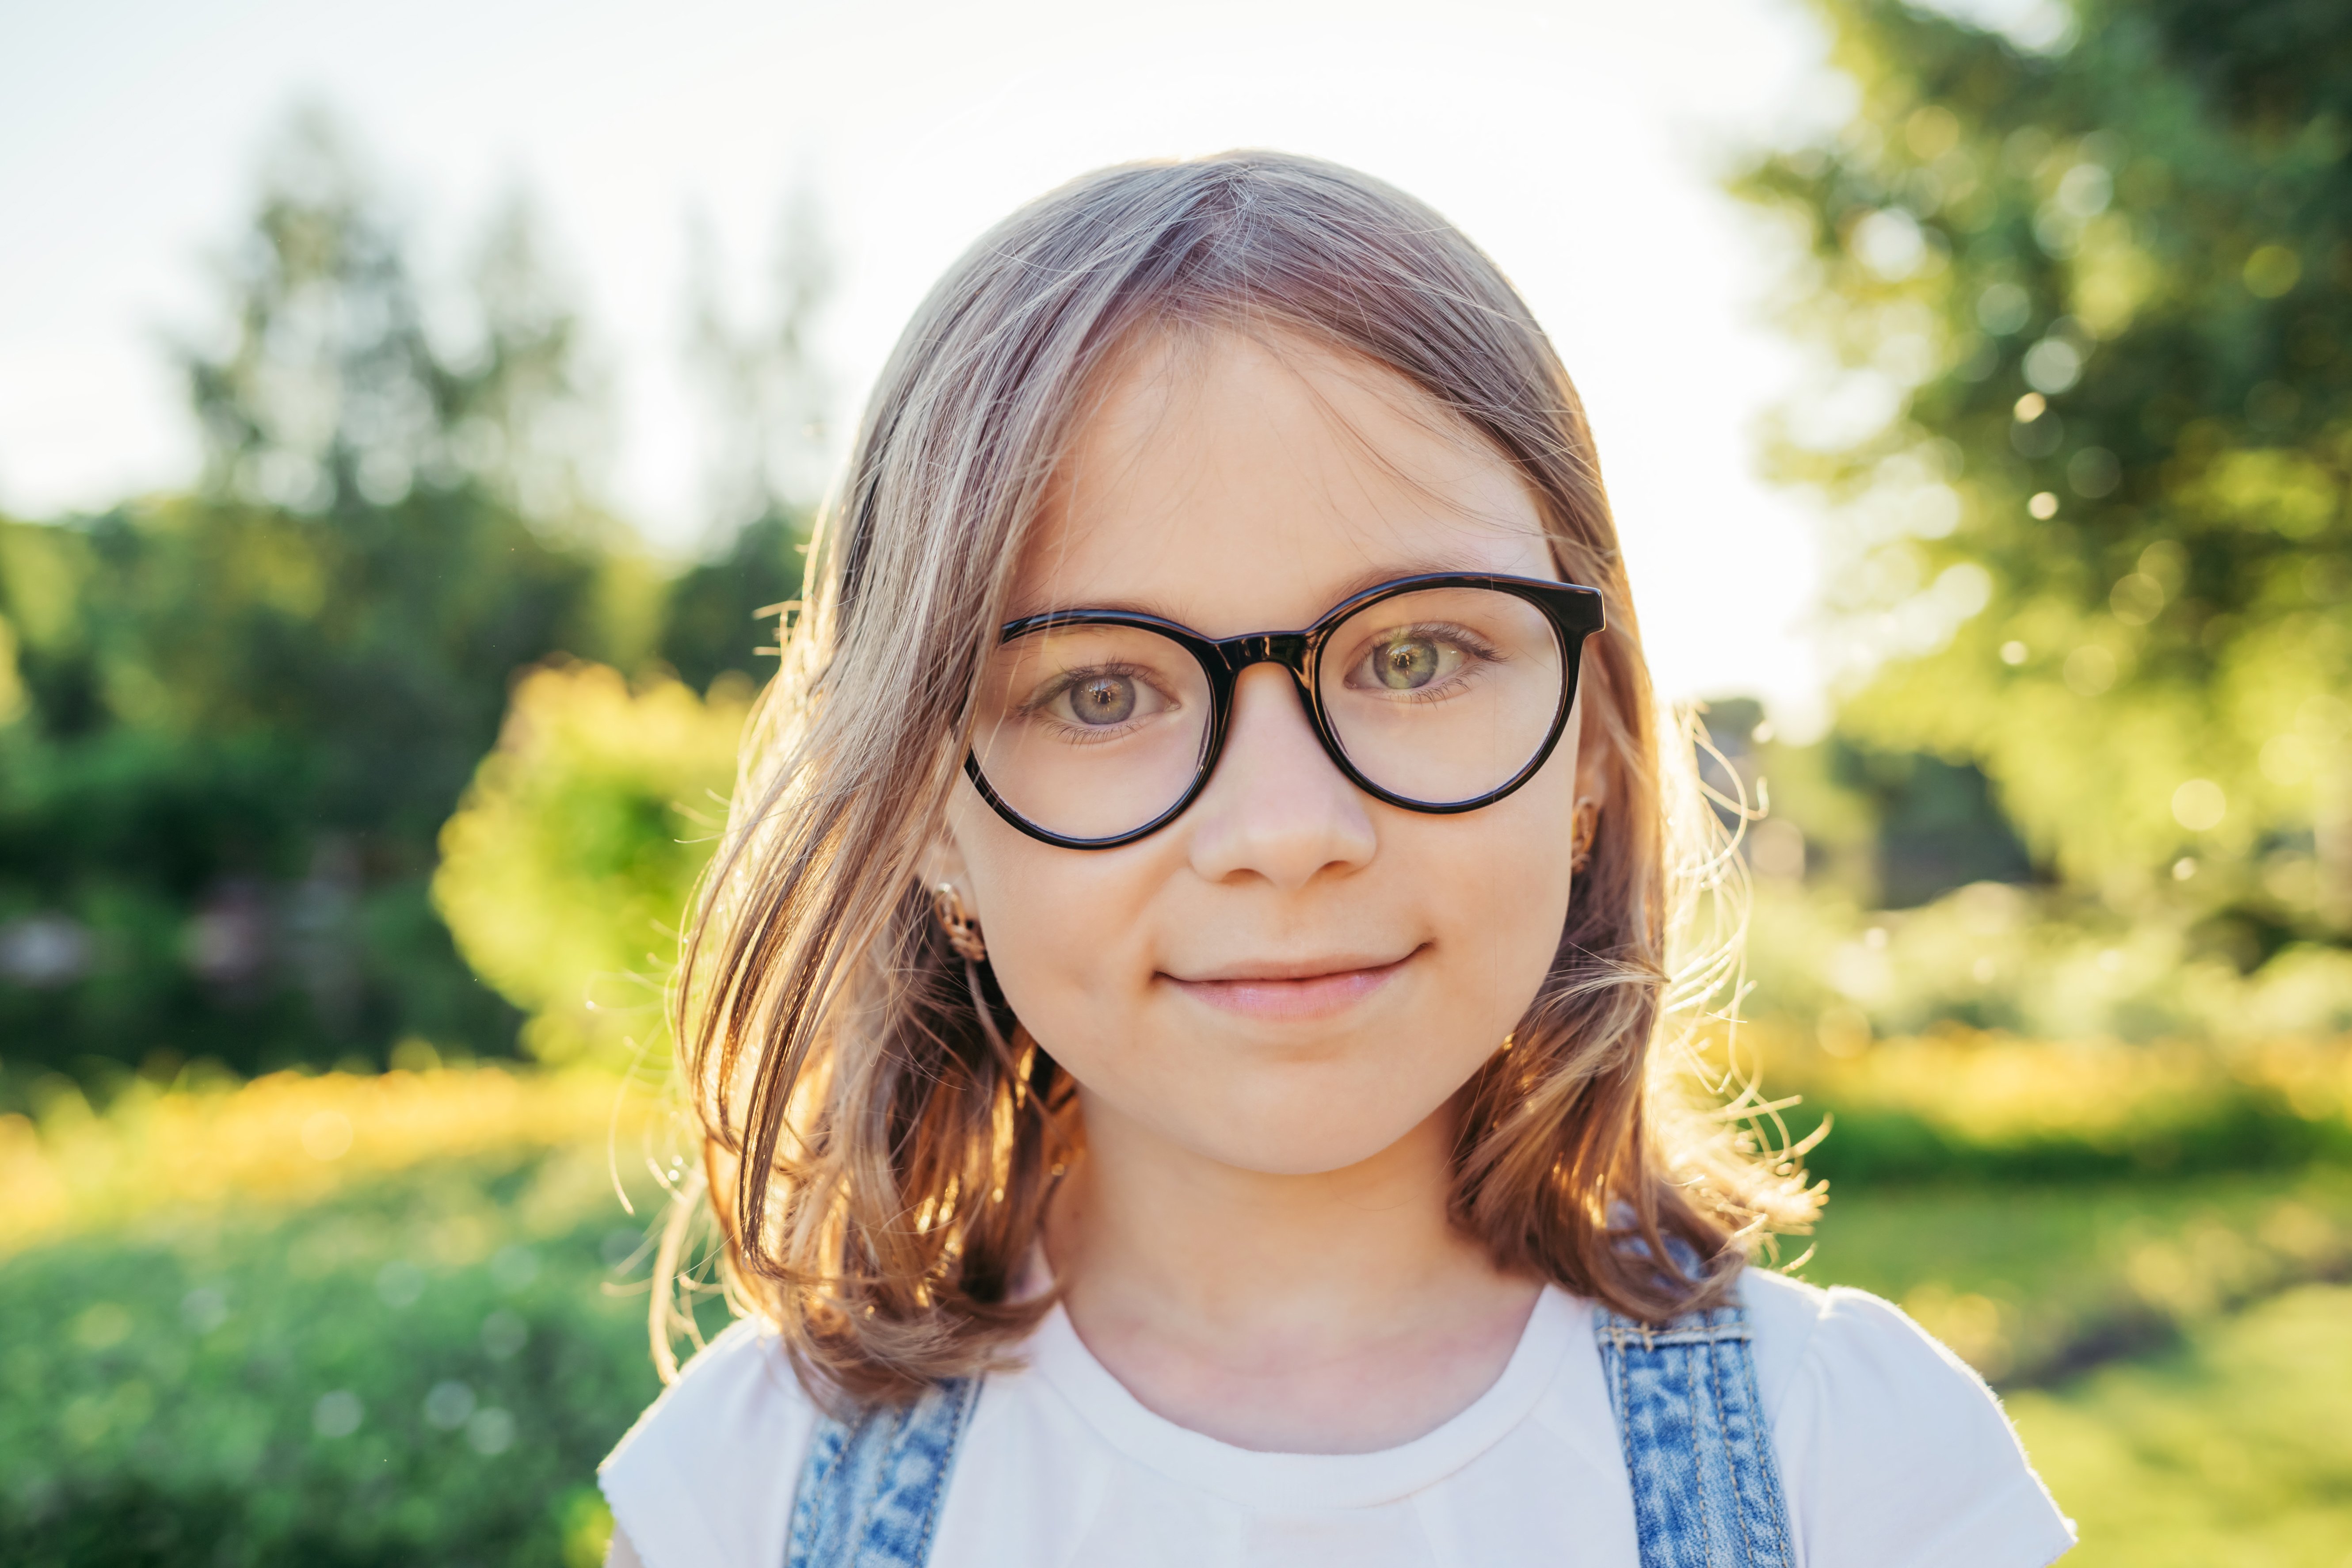 Girl looking at camera and smiling in nature. Summer leisure. Girl in glasses with black rim.